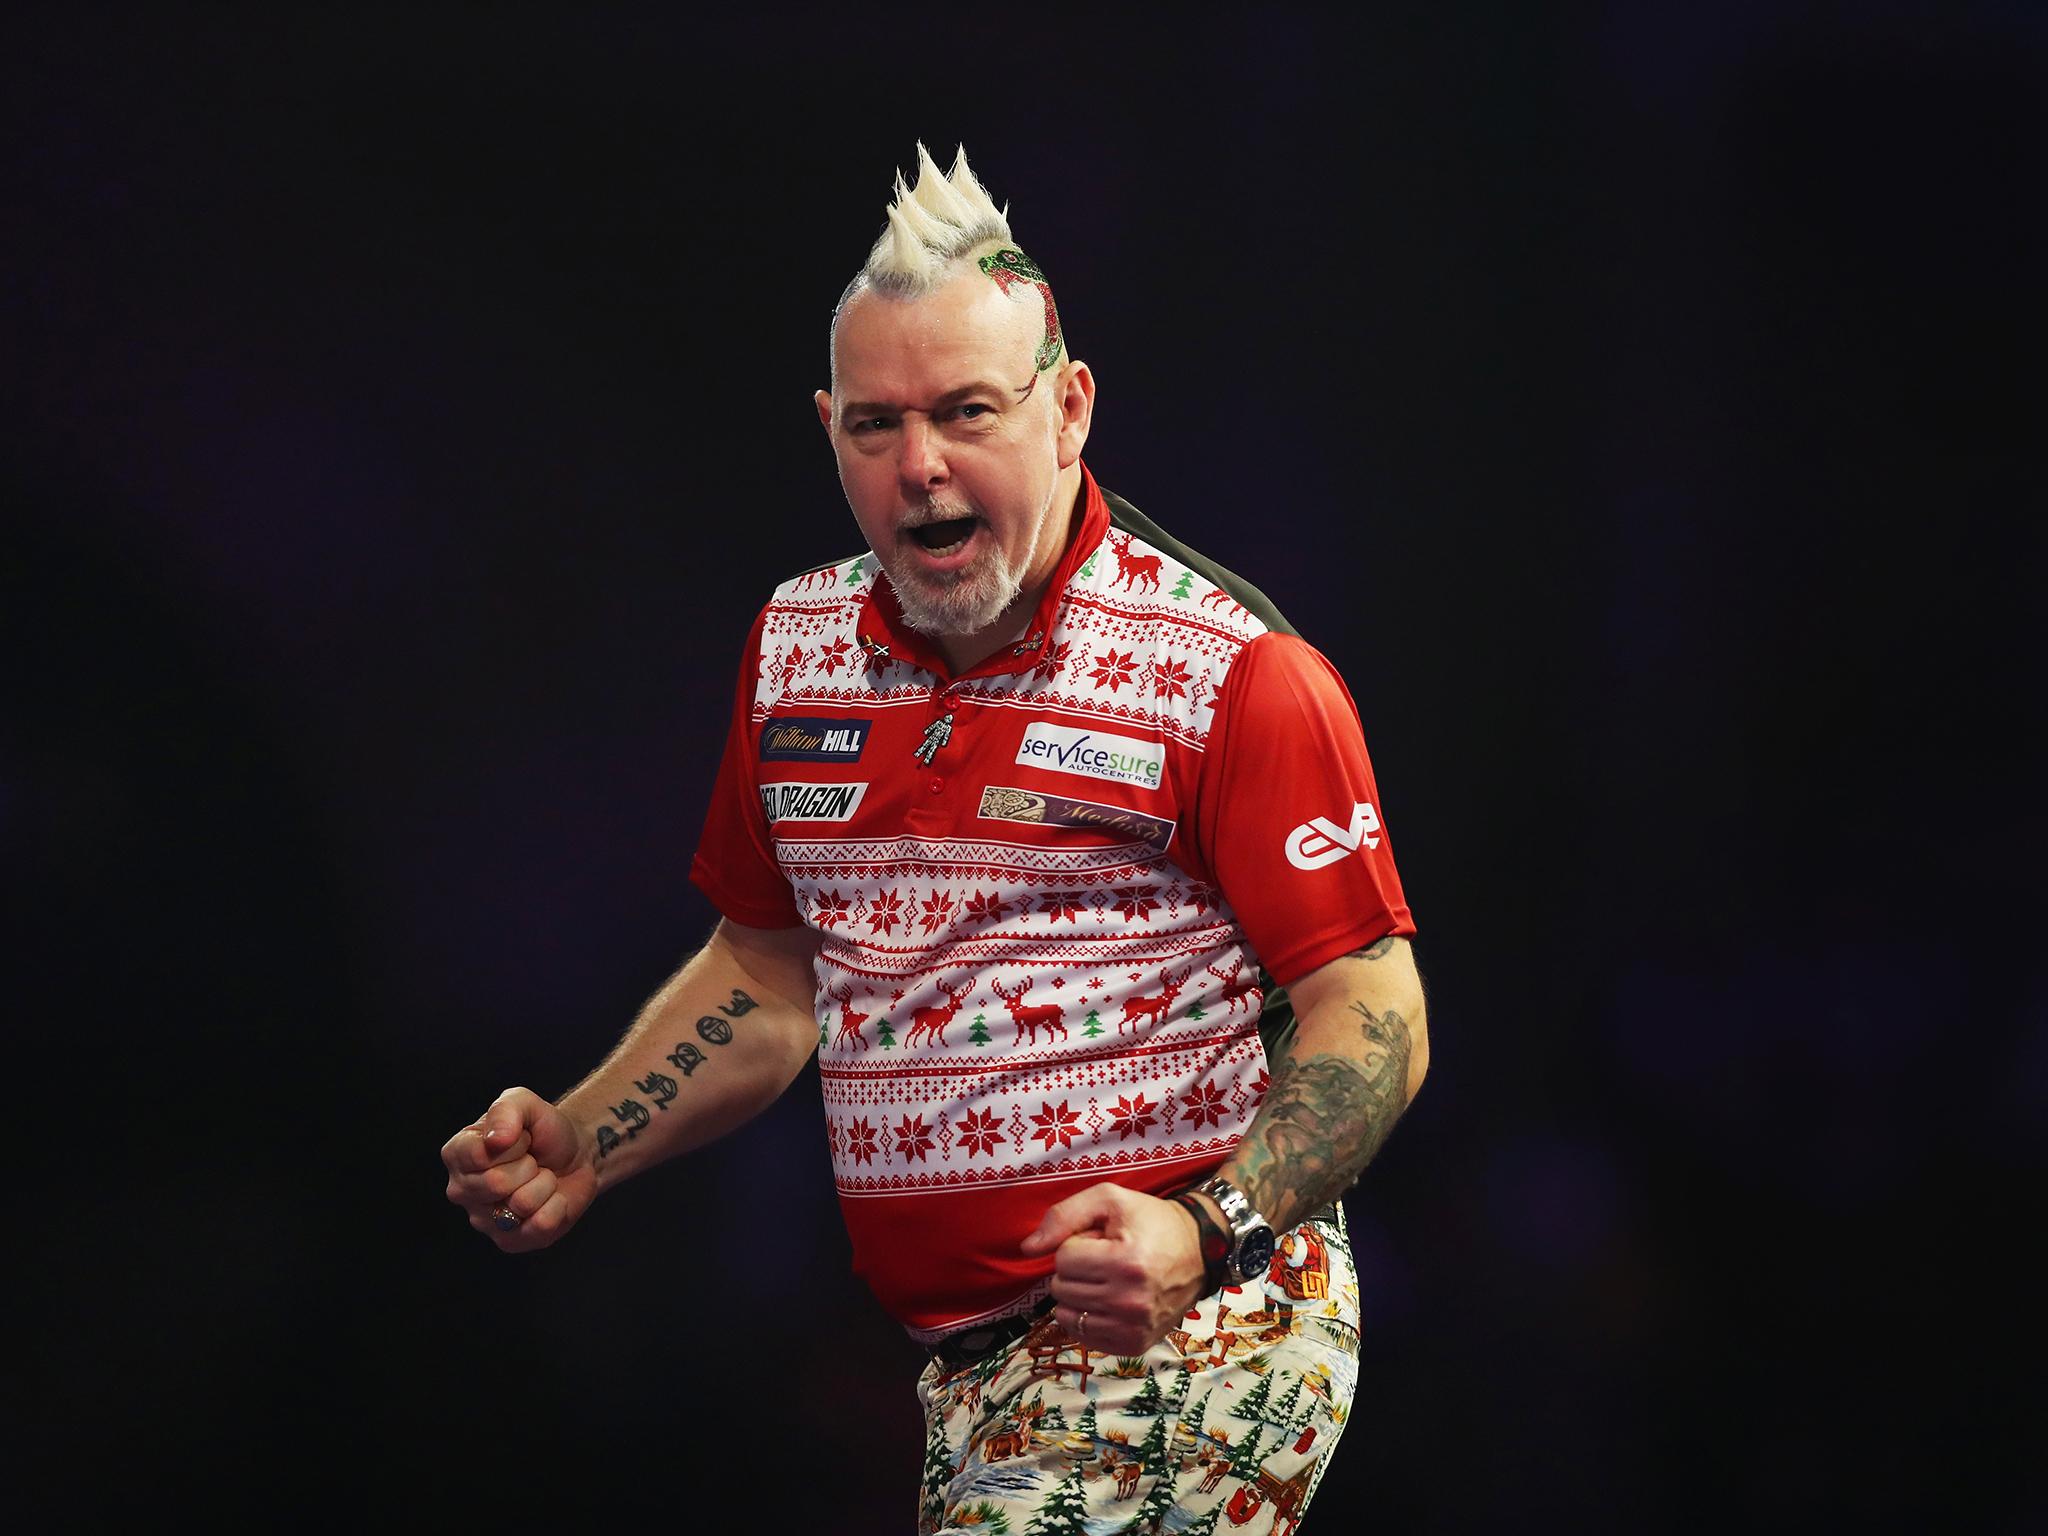 Peter Wright beat Brazilian Diogo Portela to reach the second round at the Darts World Championship